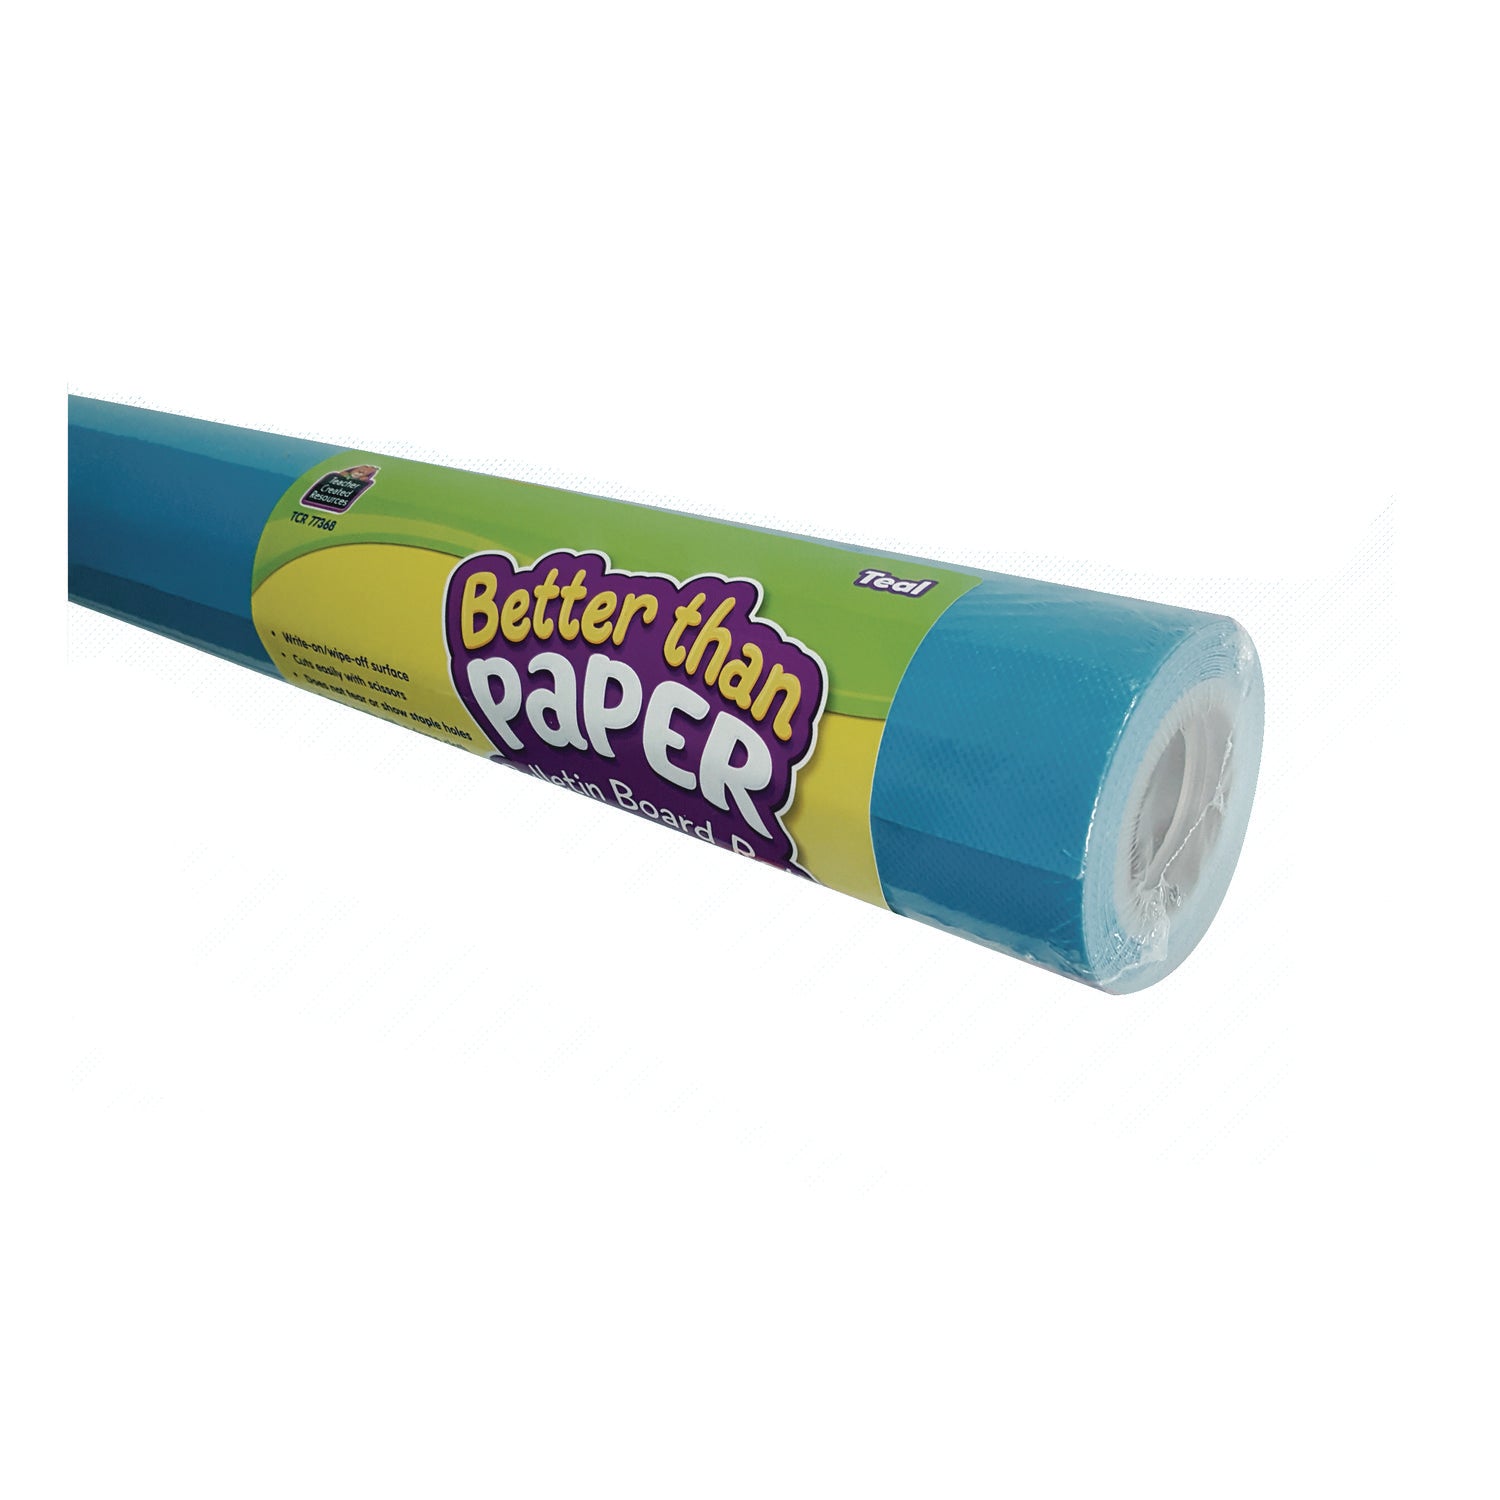 Better Than Paper Bulletin Board Roll, 4 ft x 12 ft, Teal - 1